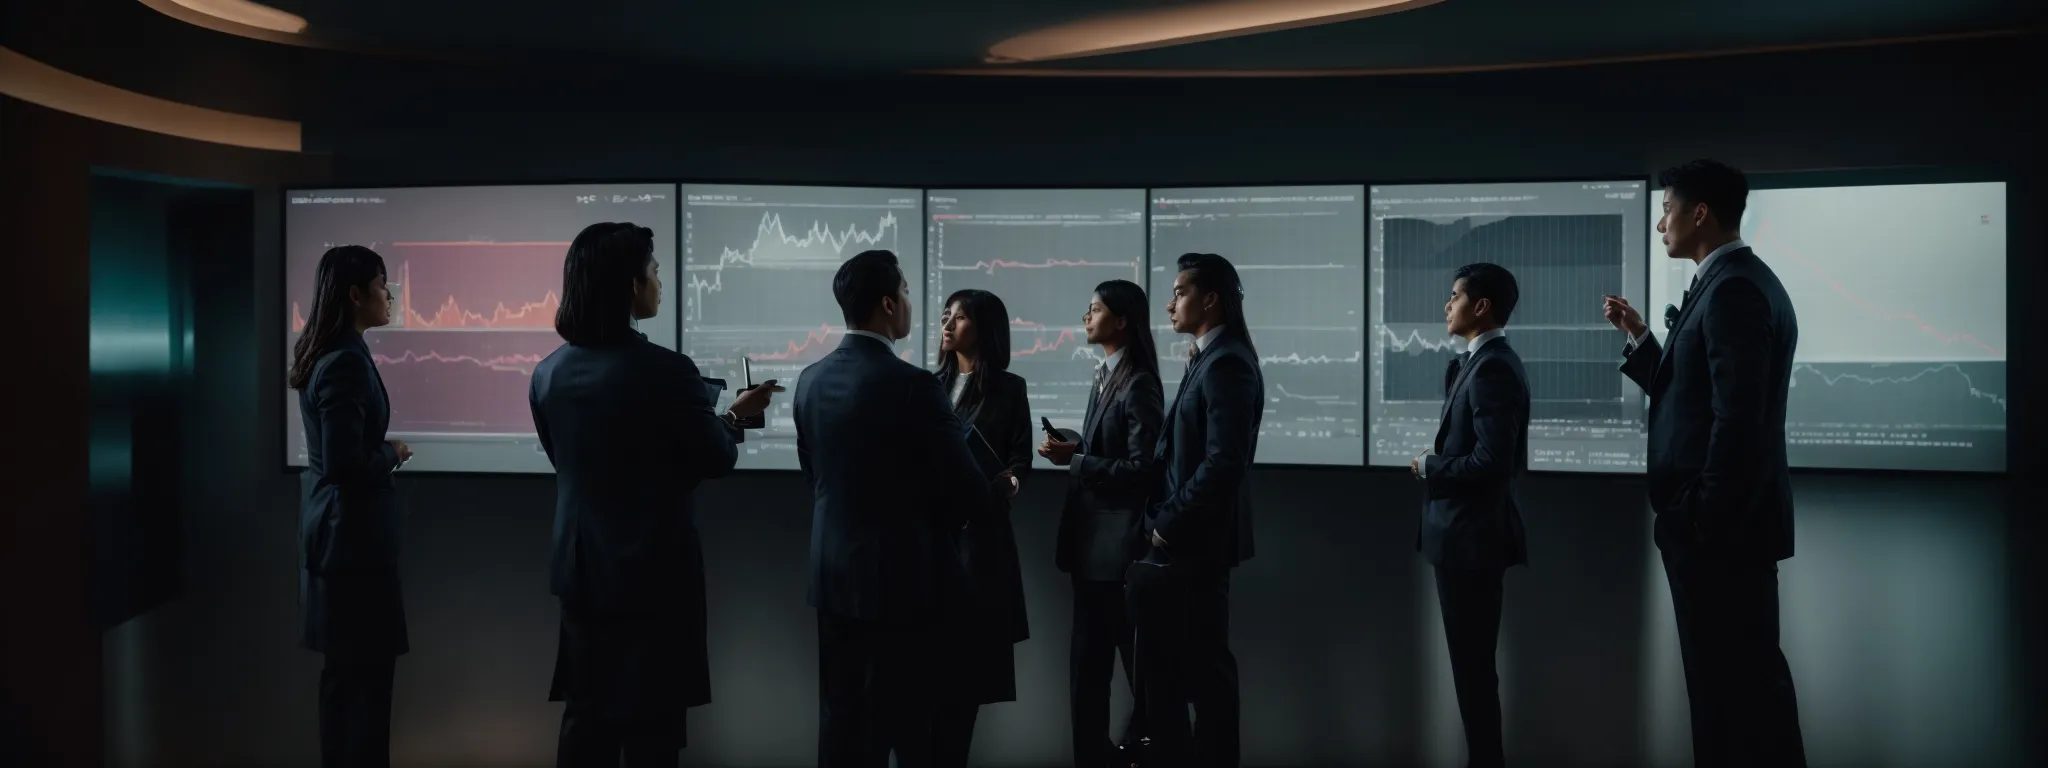 a diverse group of professionals gather around a modern digital screen, discussing graphs and analytics.